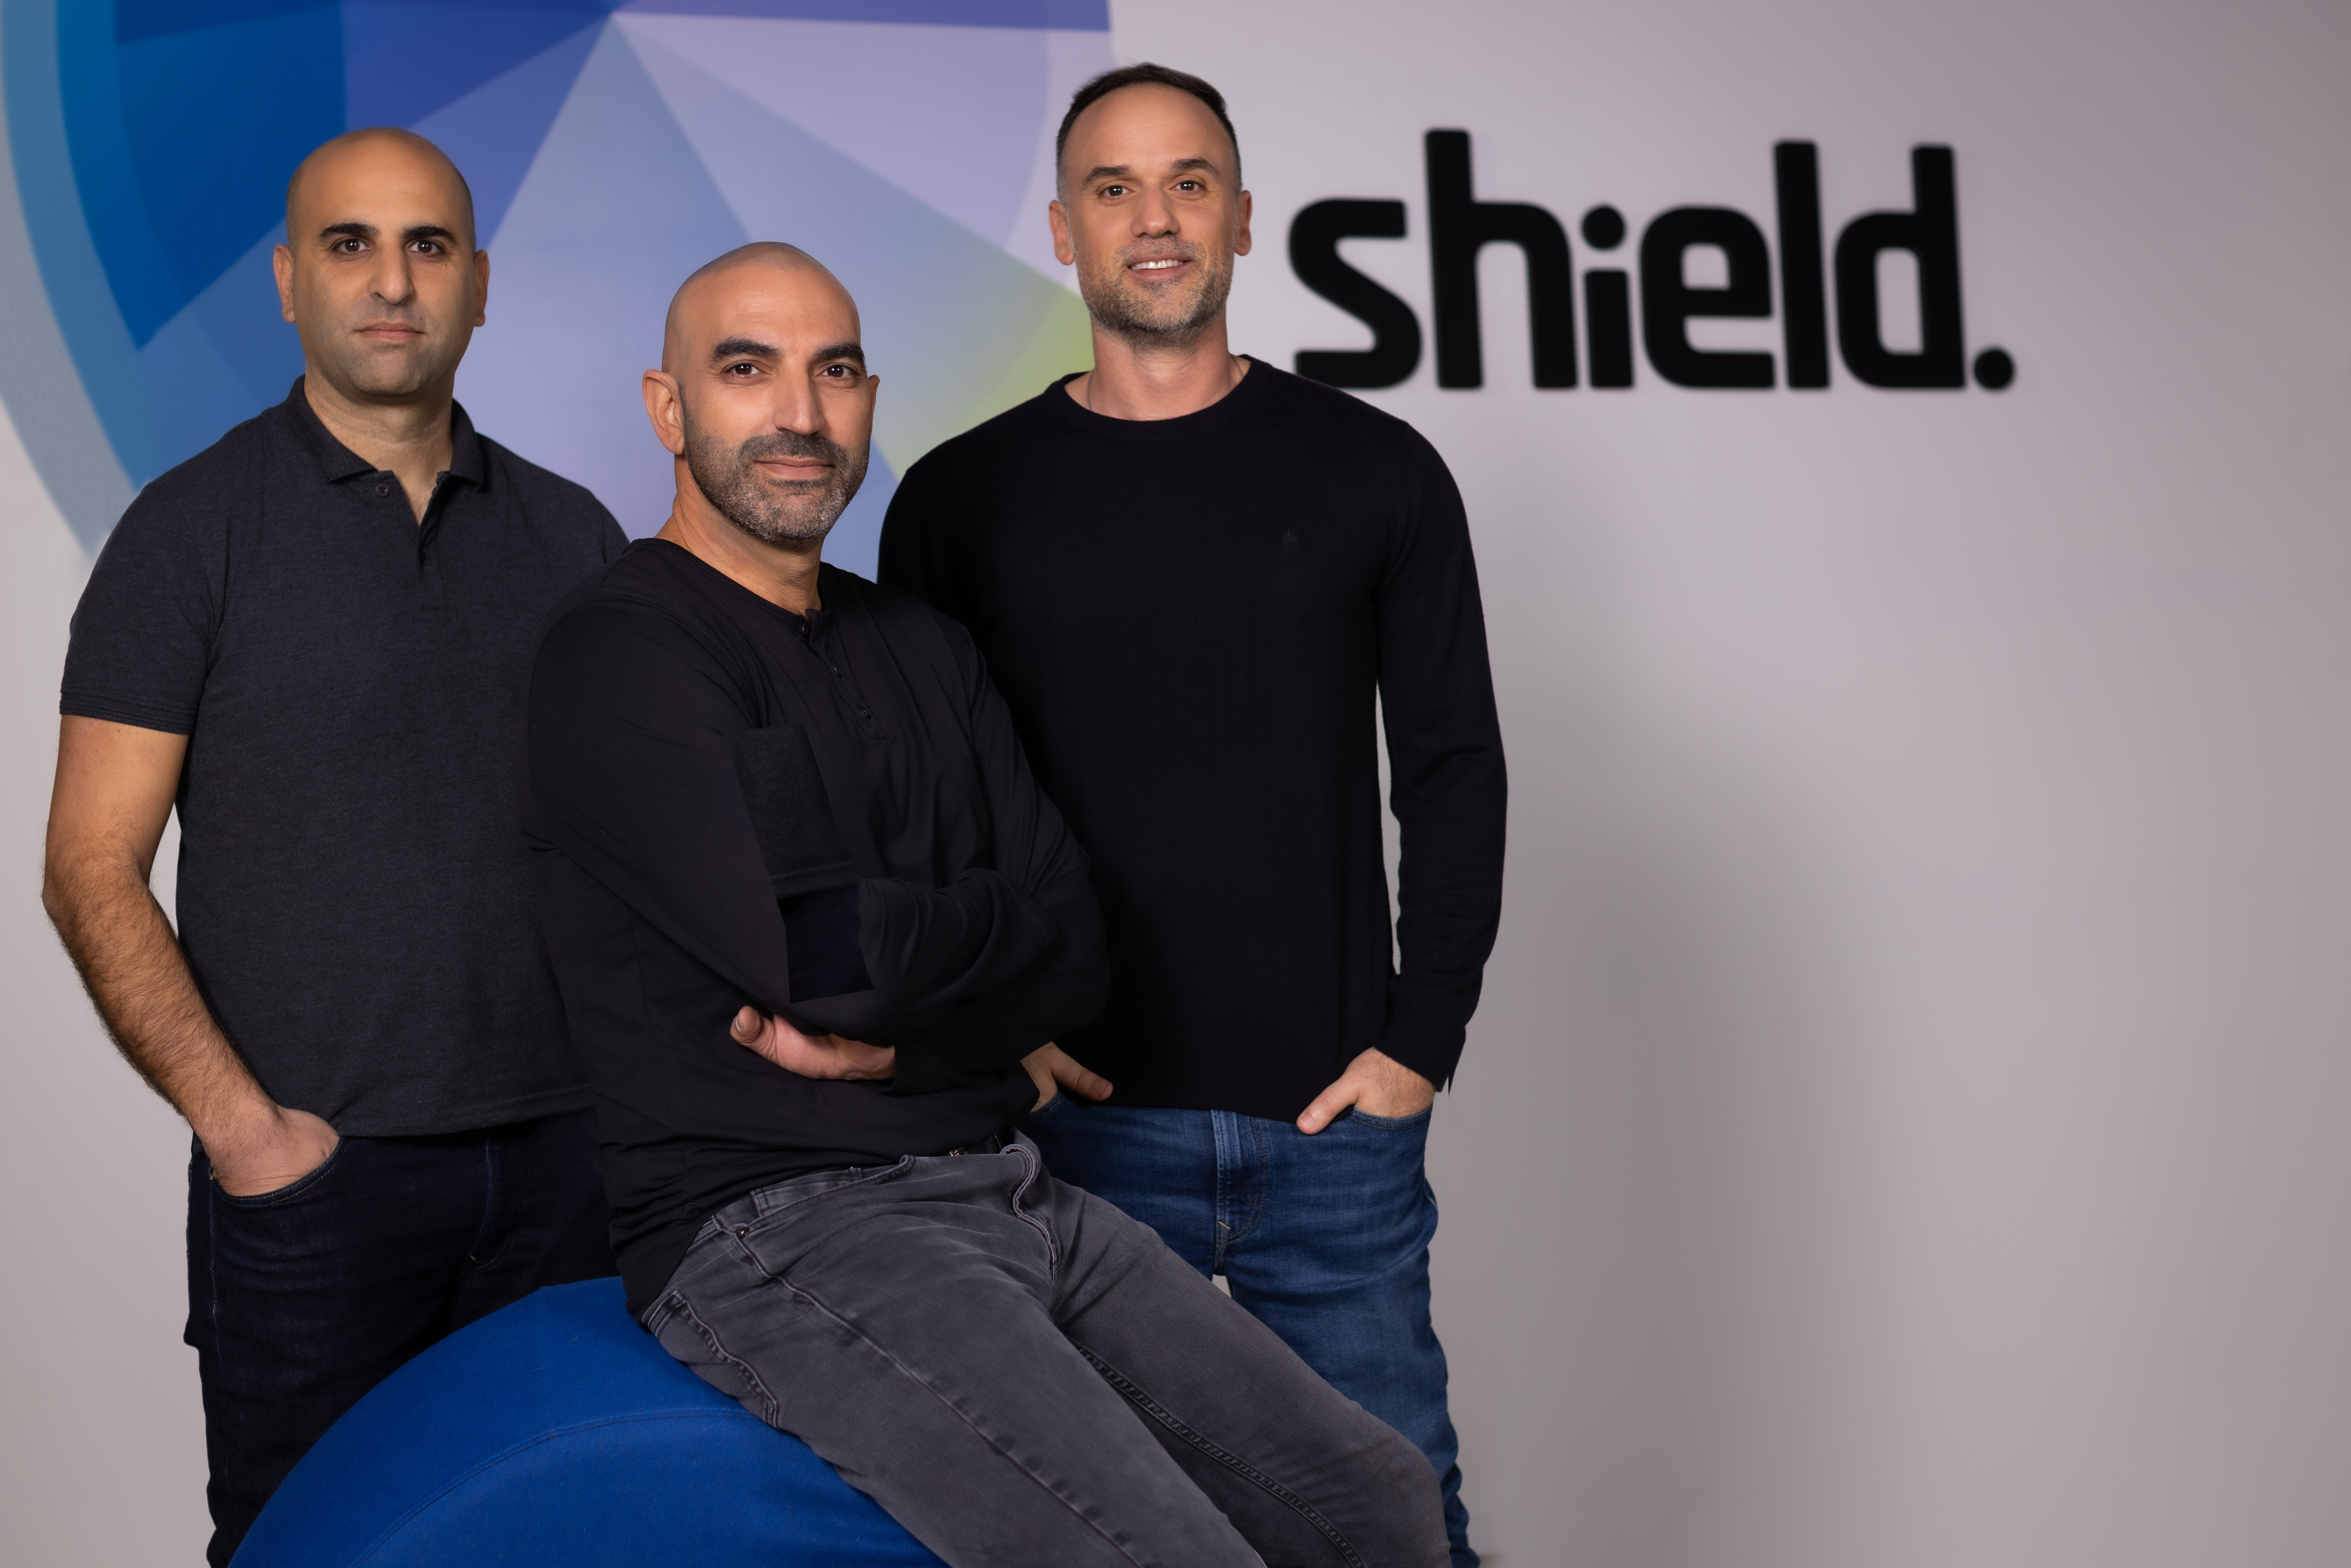 Ofir Shabtai, CTO and Co-Founder (Left), Shiran Weitzman, CEO and Co-Founder (Middle), Eran Noam, Chief Business Officer (Right)